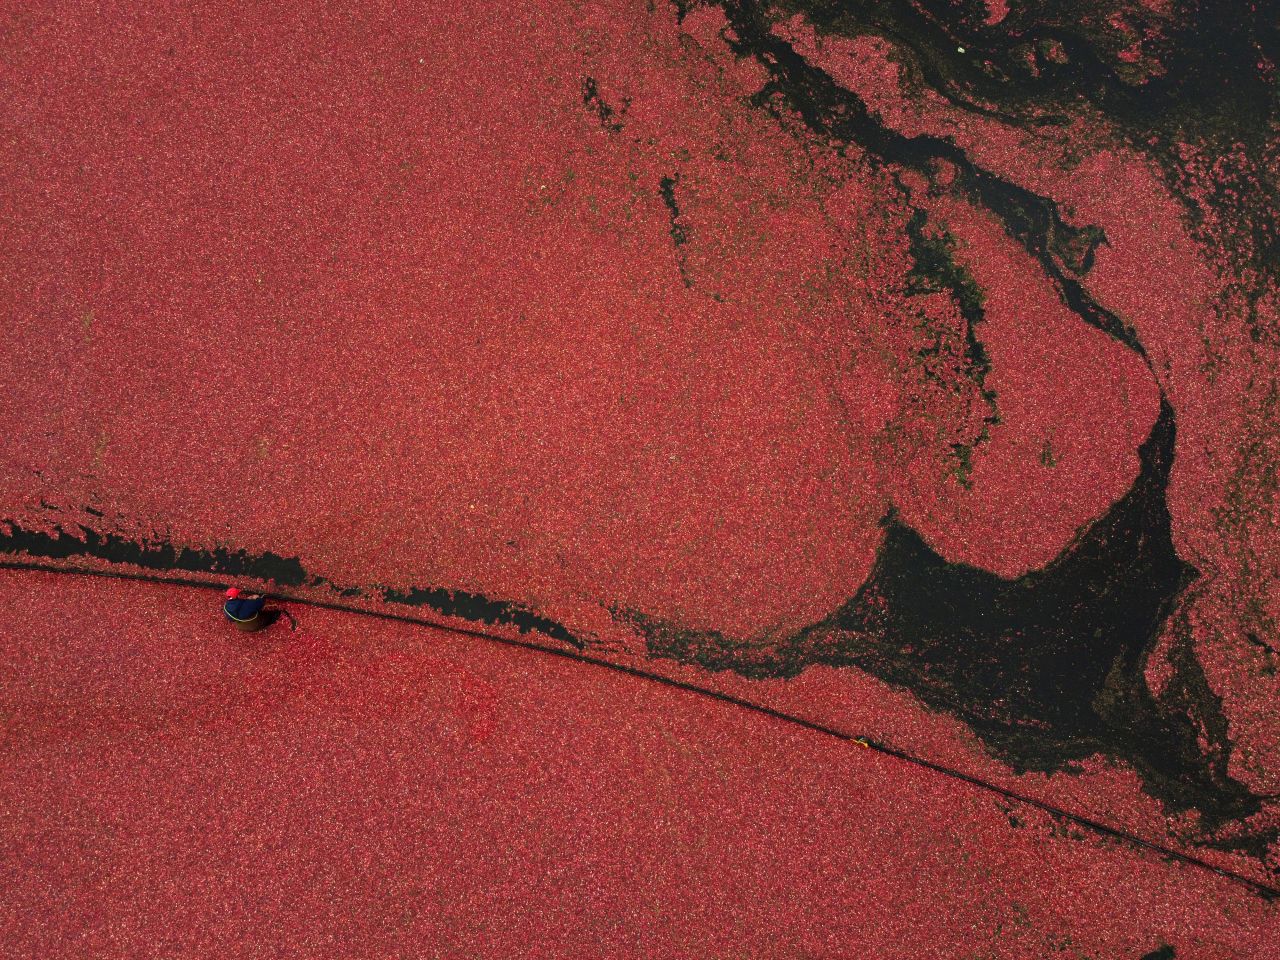 <strong>Pitt Meadows, British Columbia:</strong> A drone photograph shows cranberries being harvested in mid-October on a Canadian farm. <br />